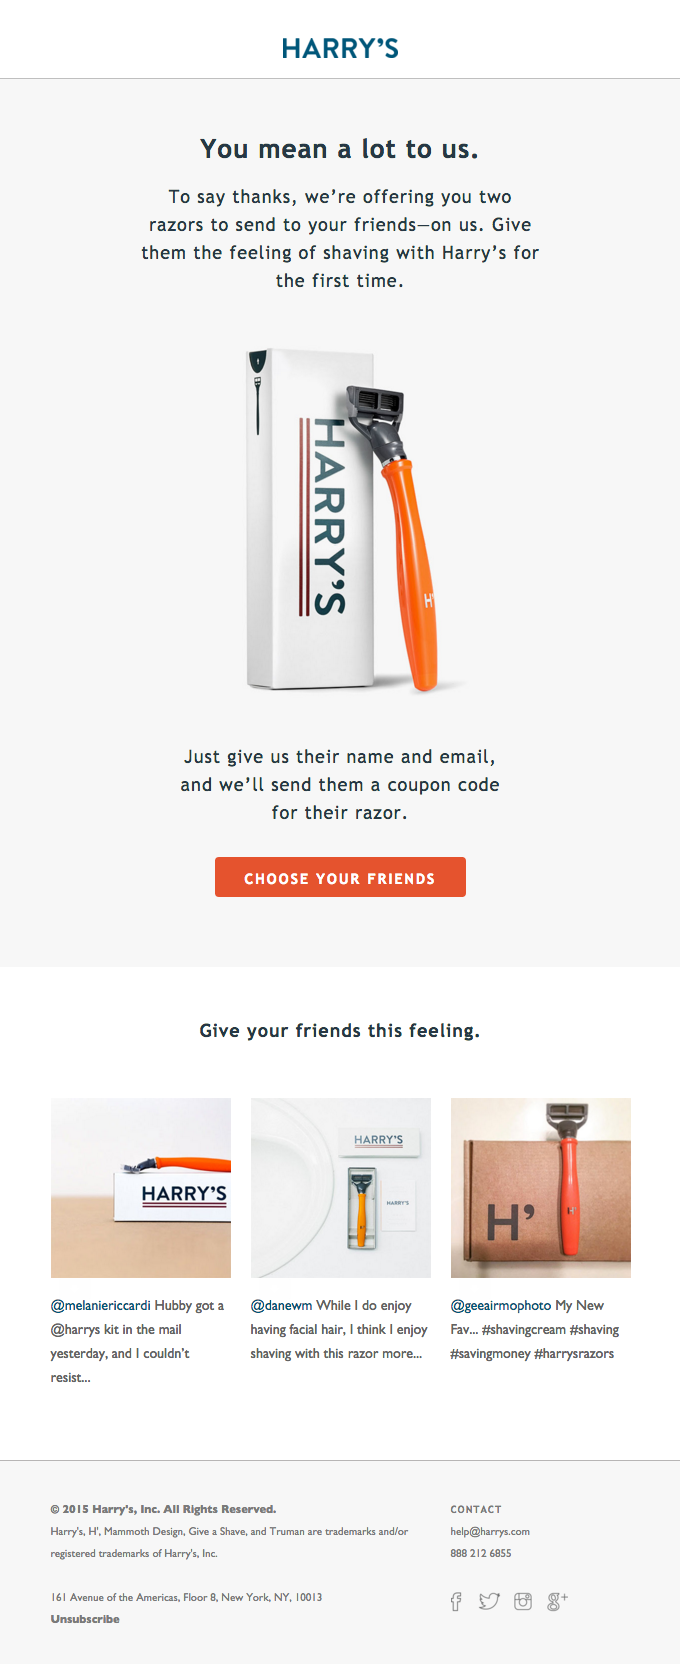 Two razors for your friends (on us)